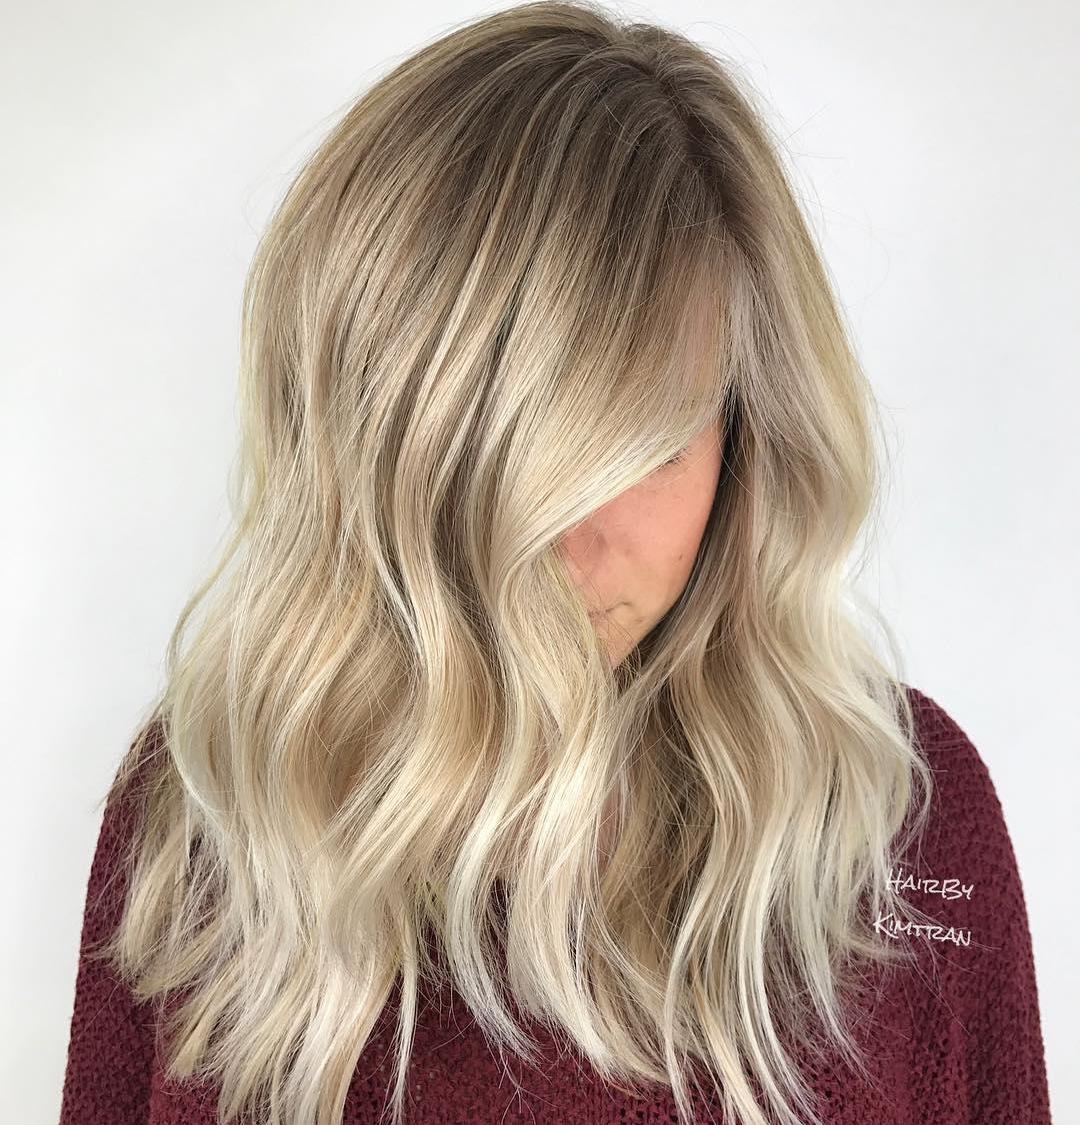 Woman with mid length, beige blonde hair styled with loose waves